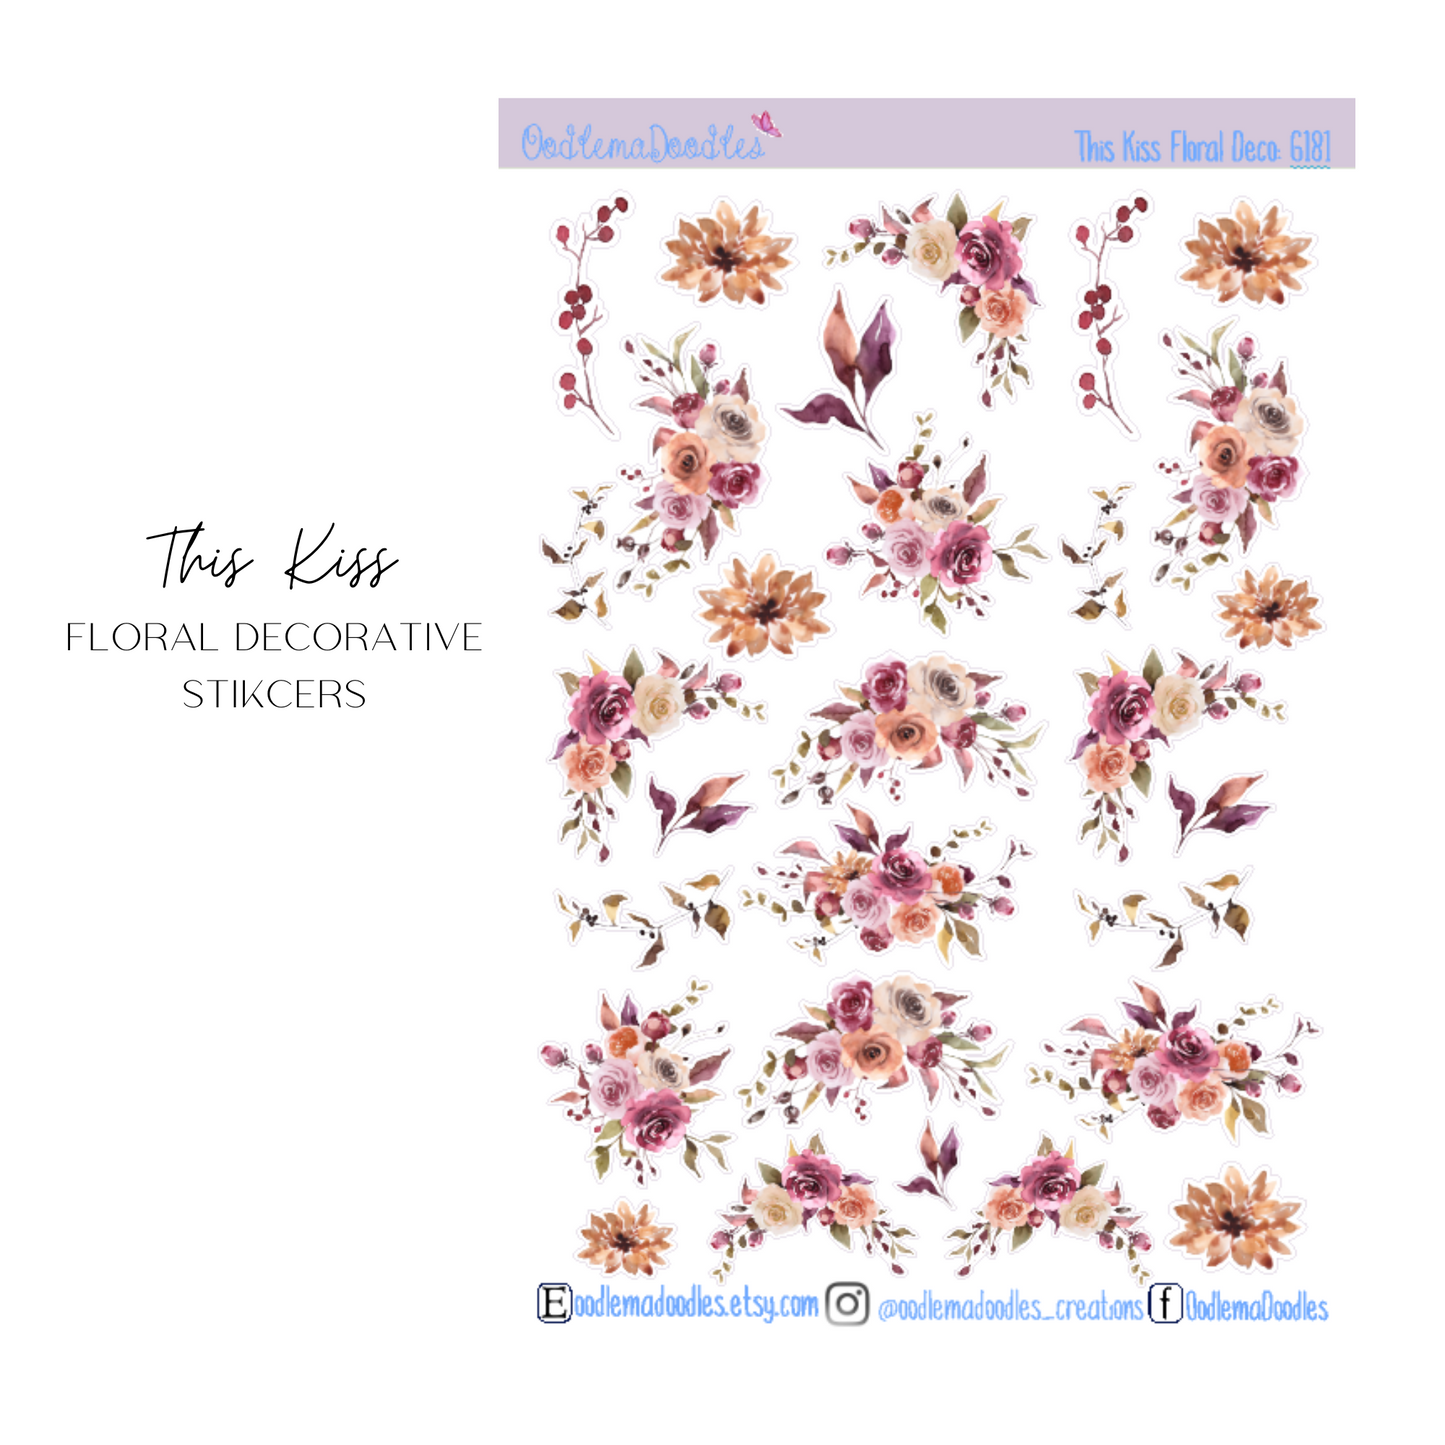 This Kiss Floral Decorative Stickers